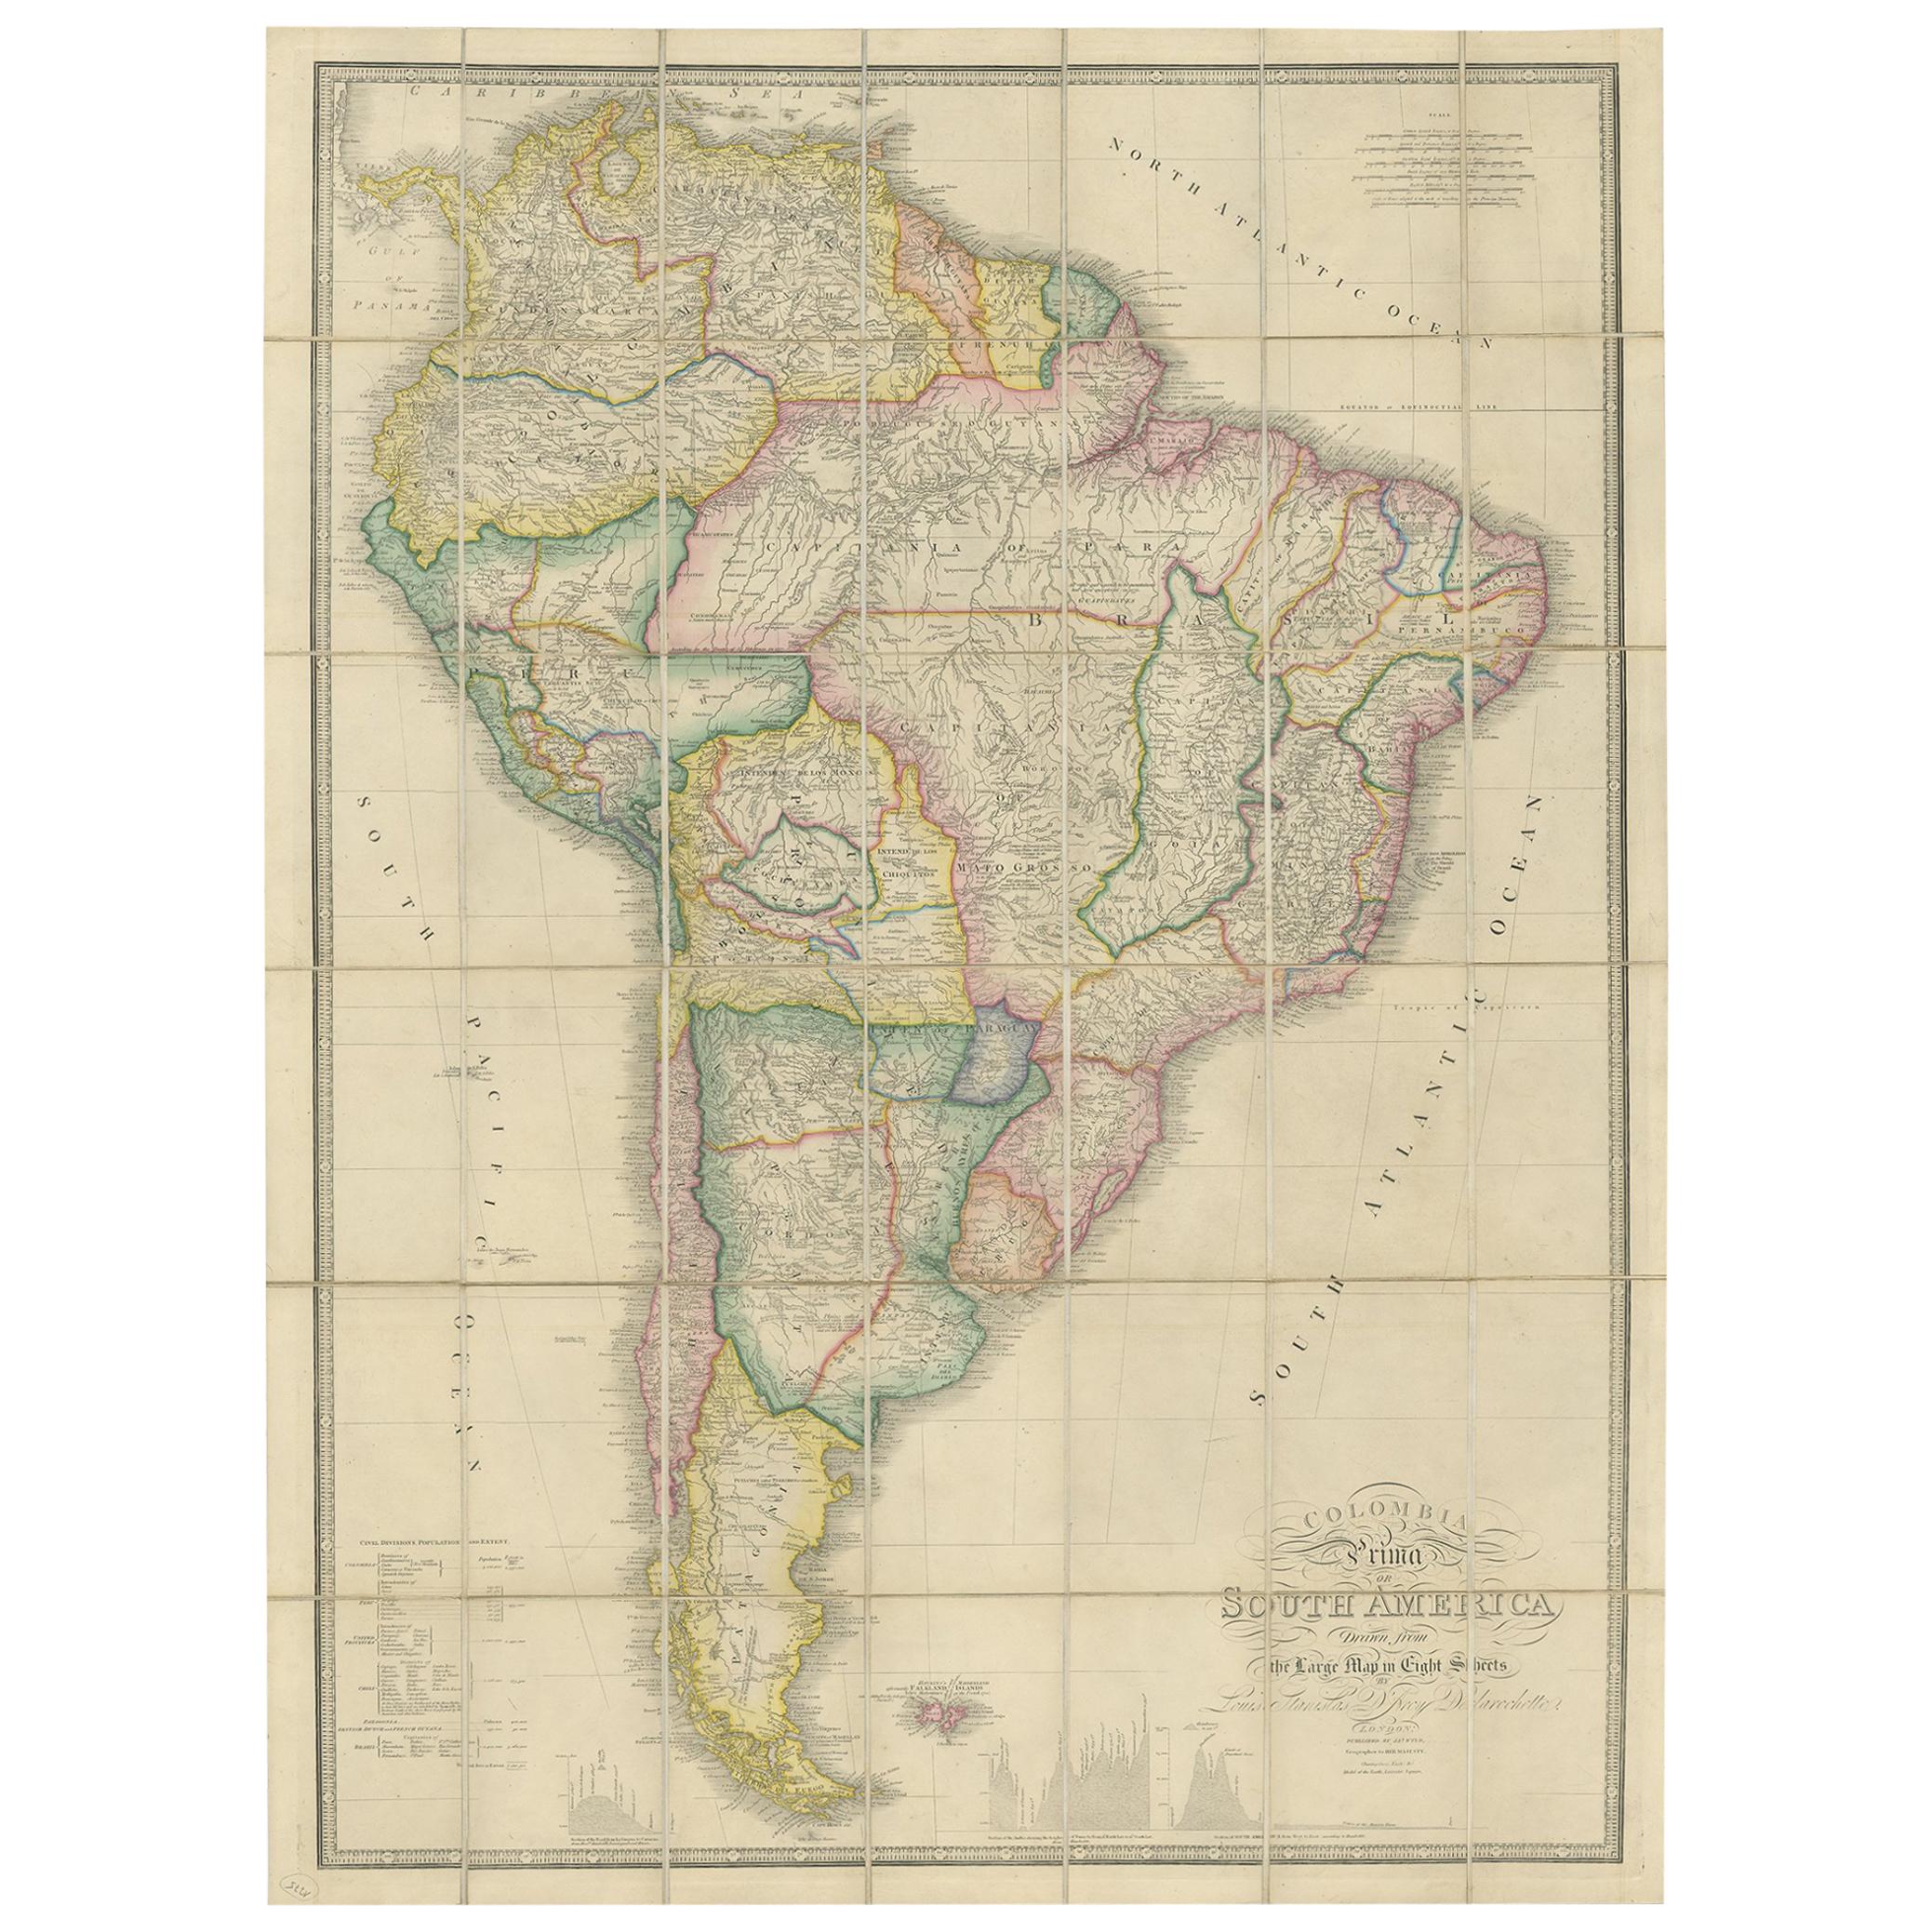 Antique Map of South America by Wyld, circa 1850